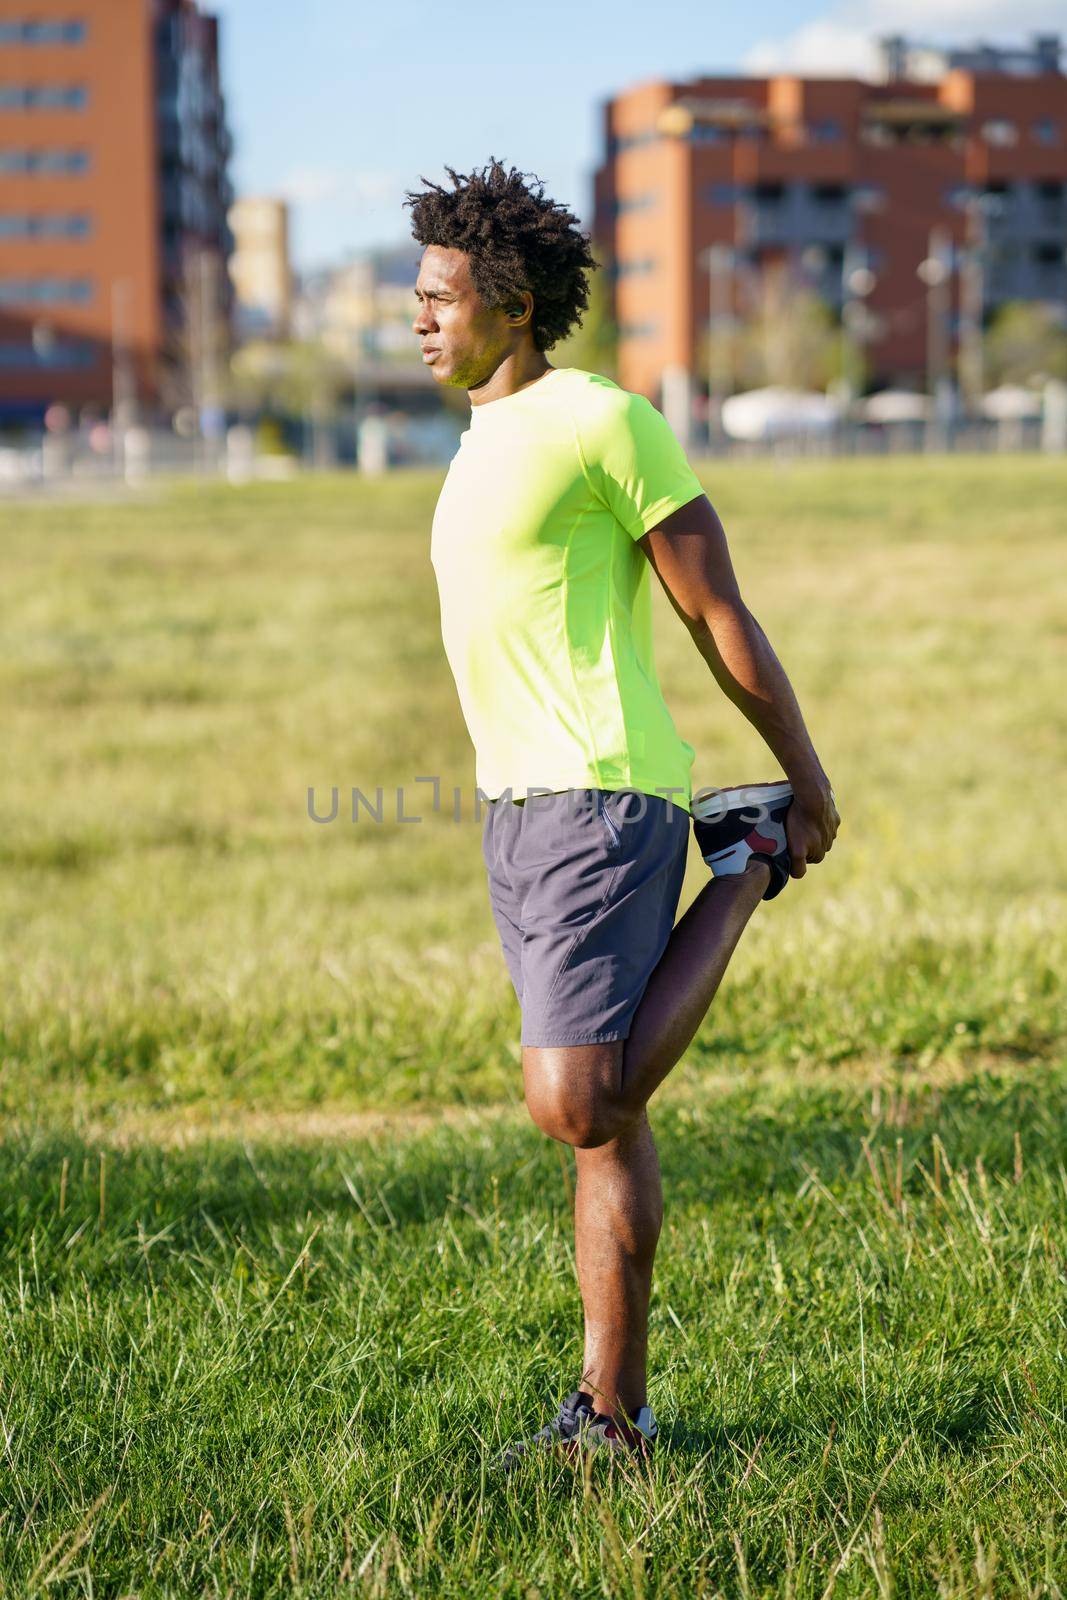 Black man stretching his quadriceps after running outdoors. by javiindy